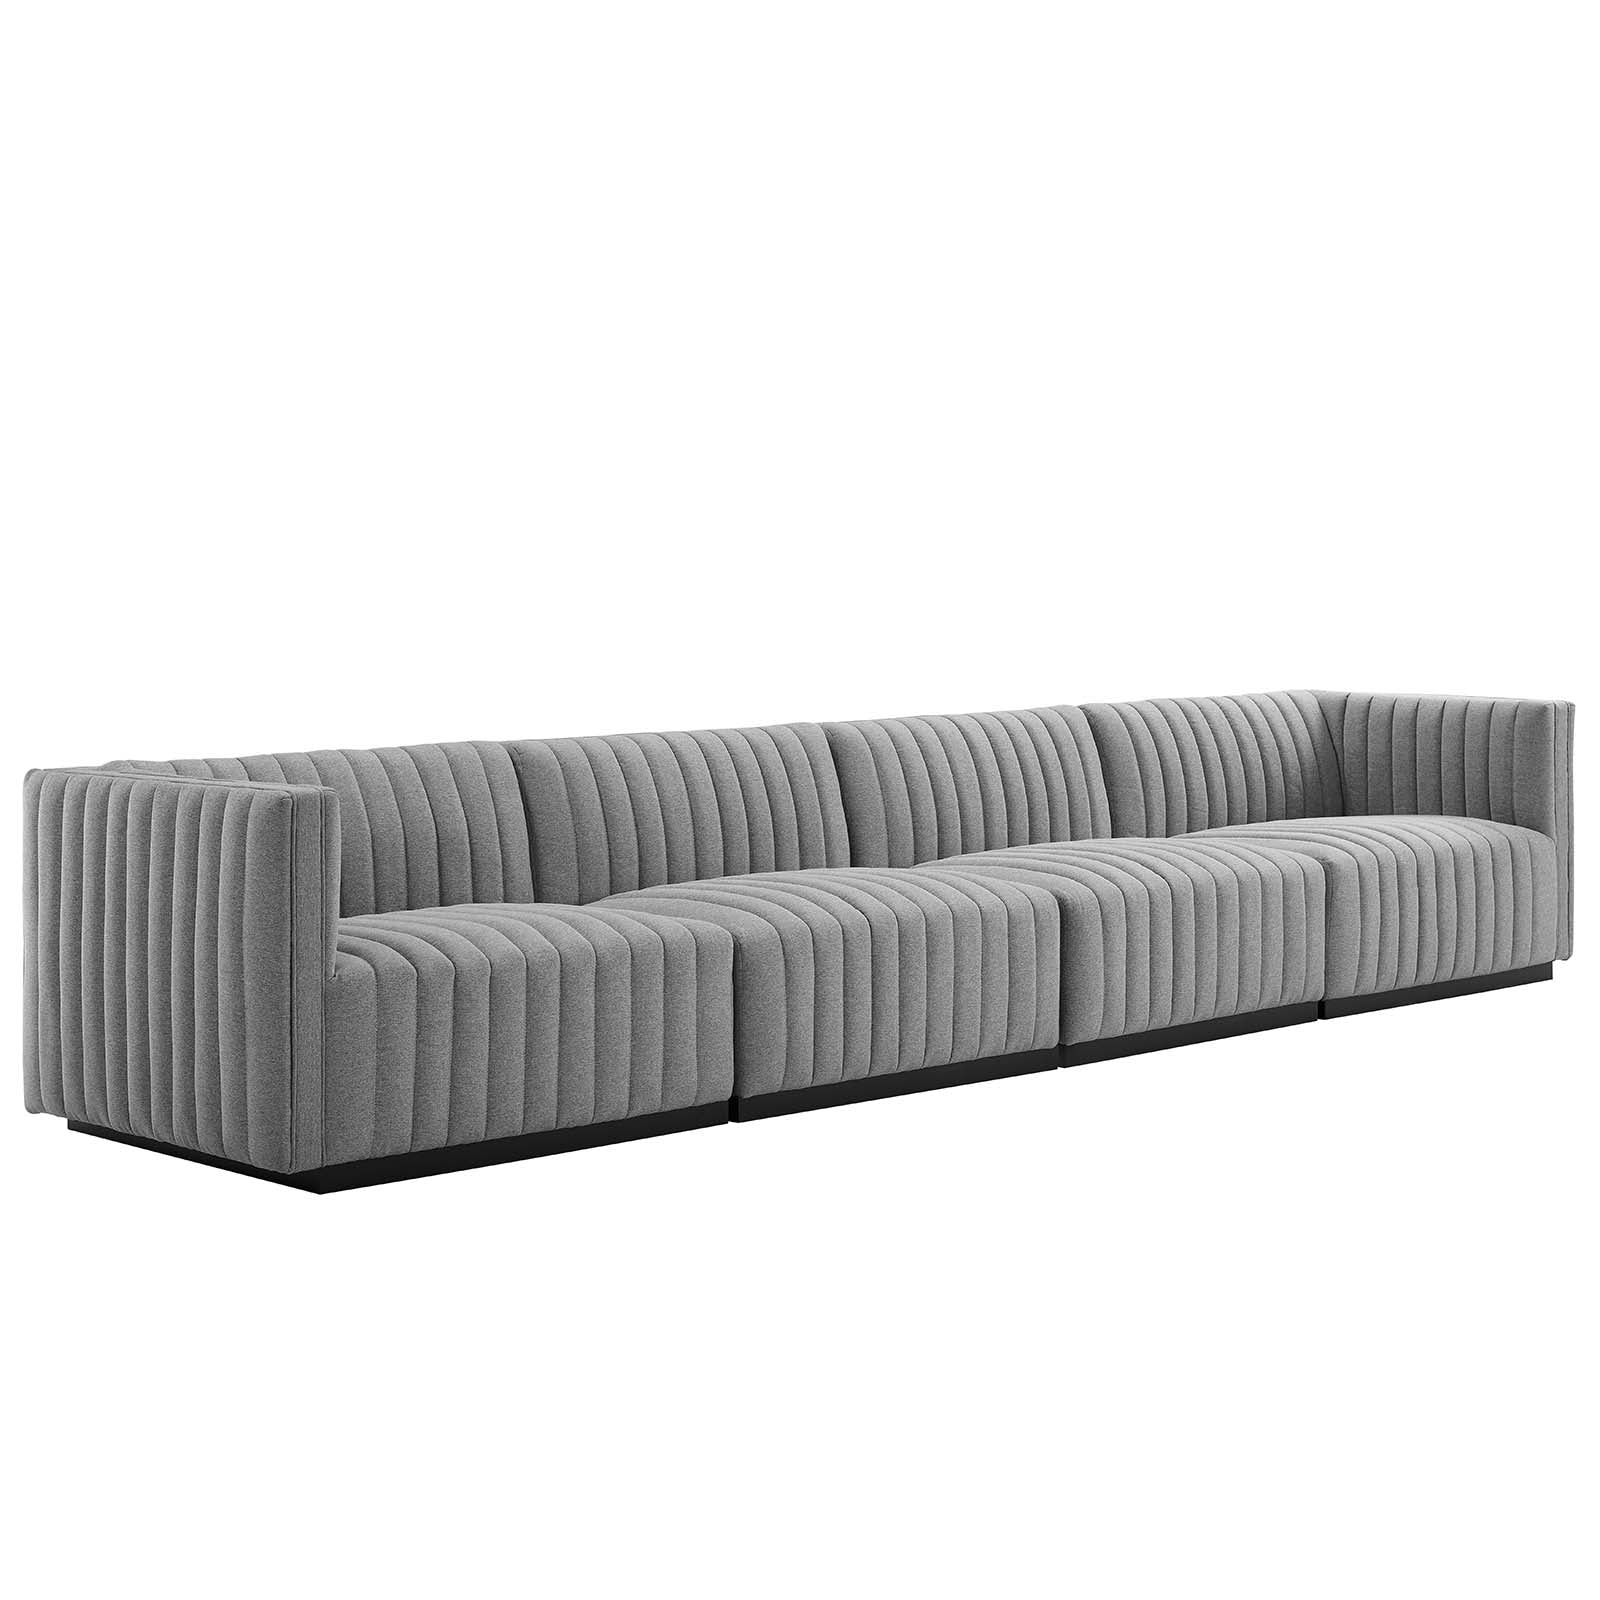 Conjure Channel Tufted Upholstered Fabric 4-Piece Sofa - East Shore Modern Home Furnishings